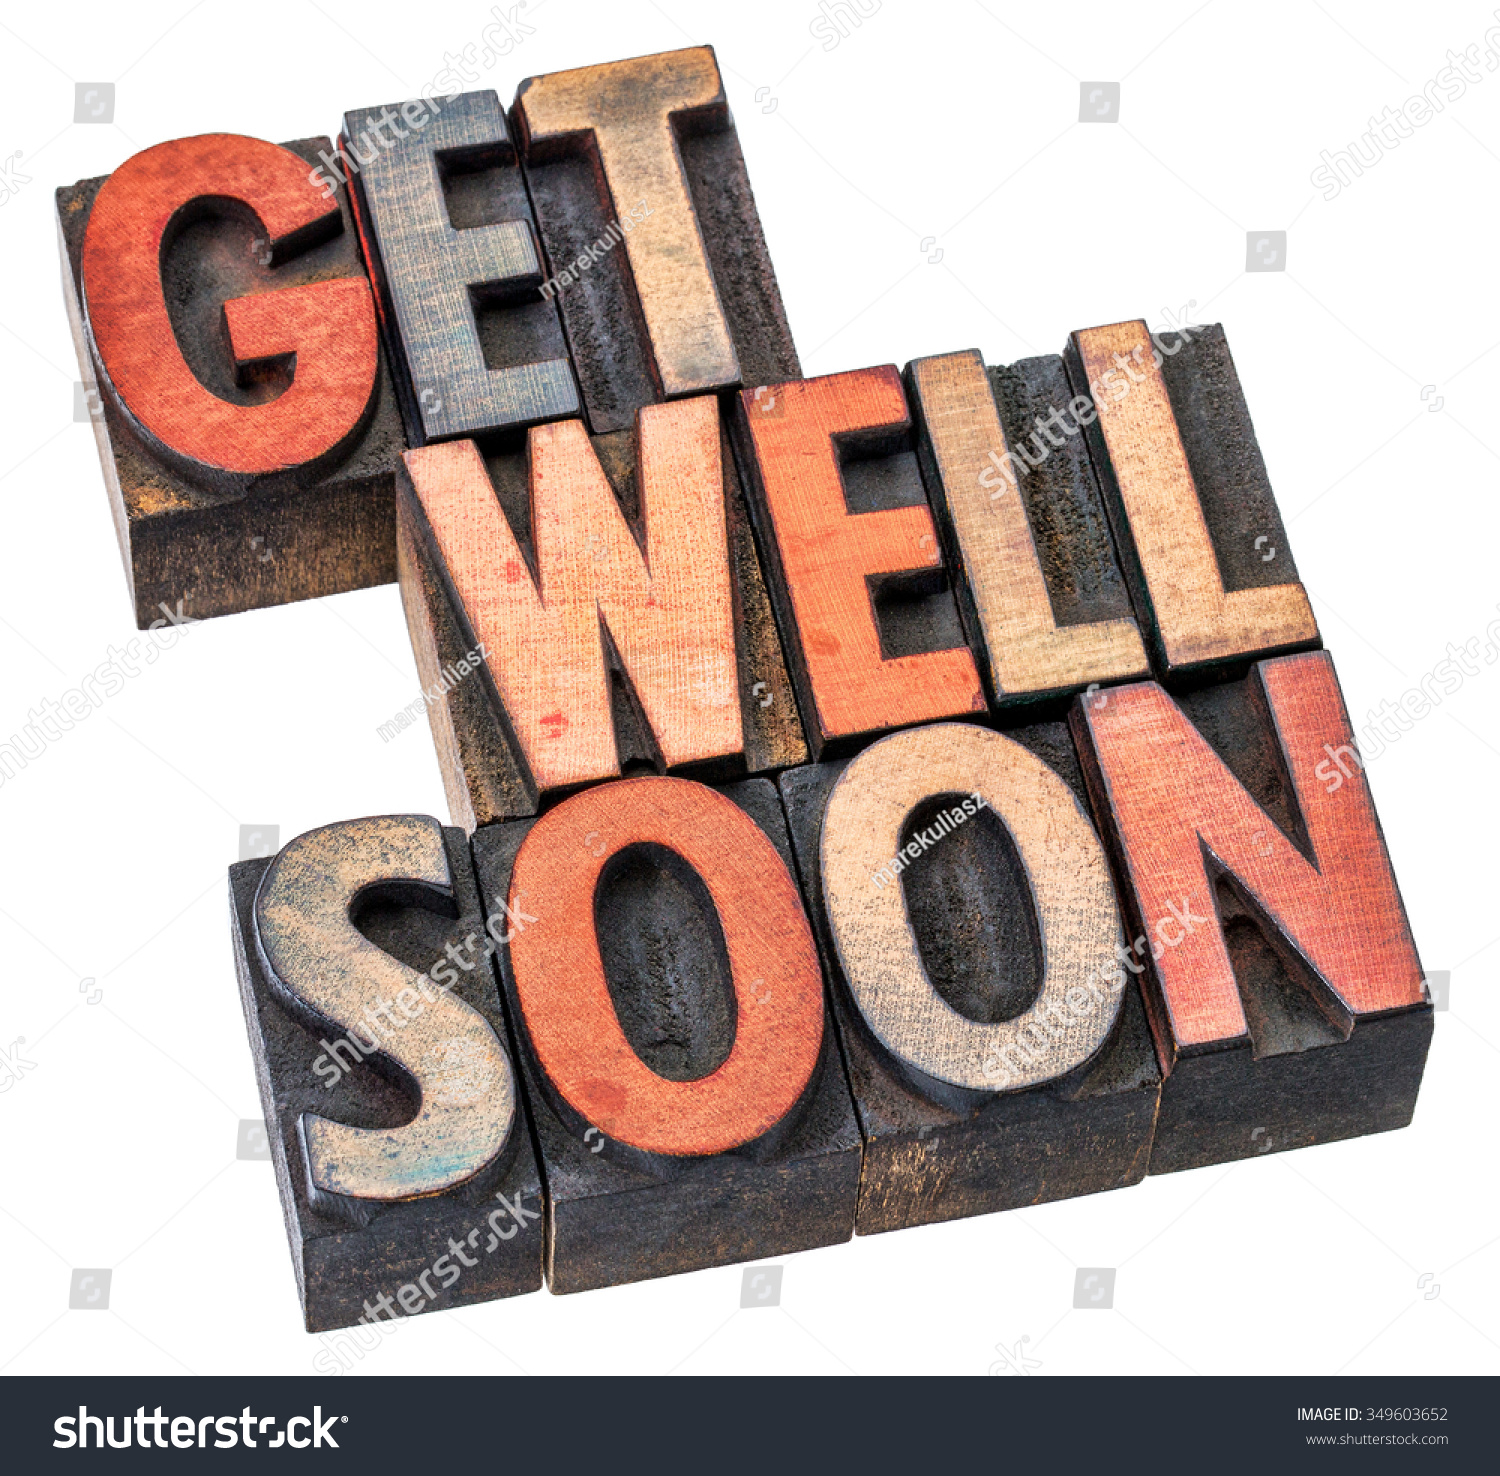 Get well soon wishes in letterpress wood type printing blocks stained by inks, isolated on white #349603652